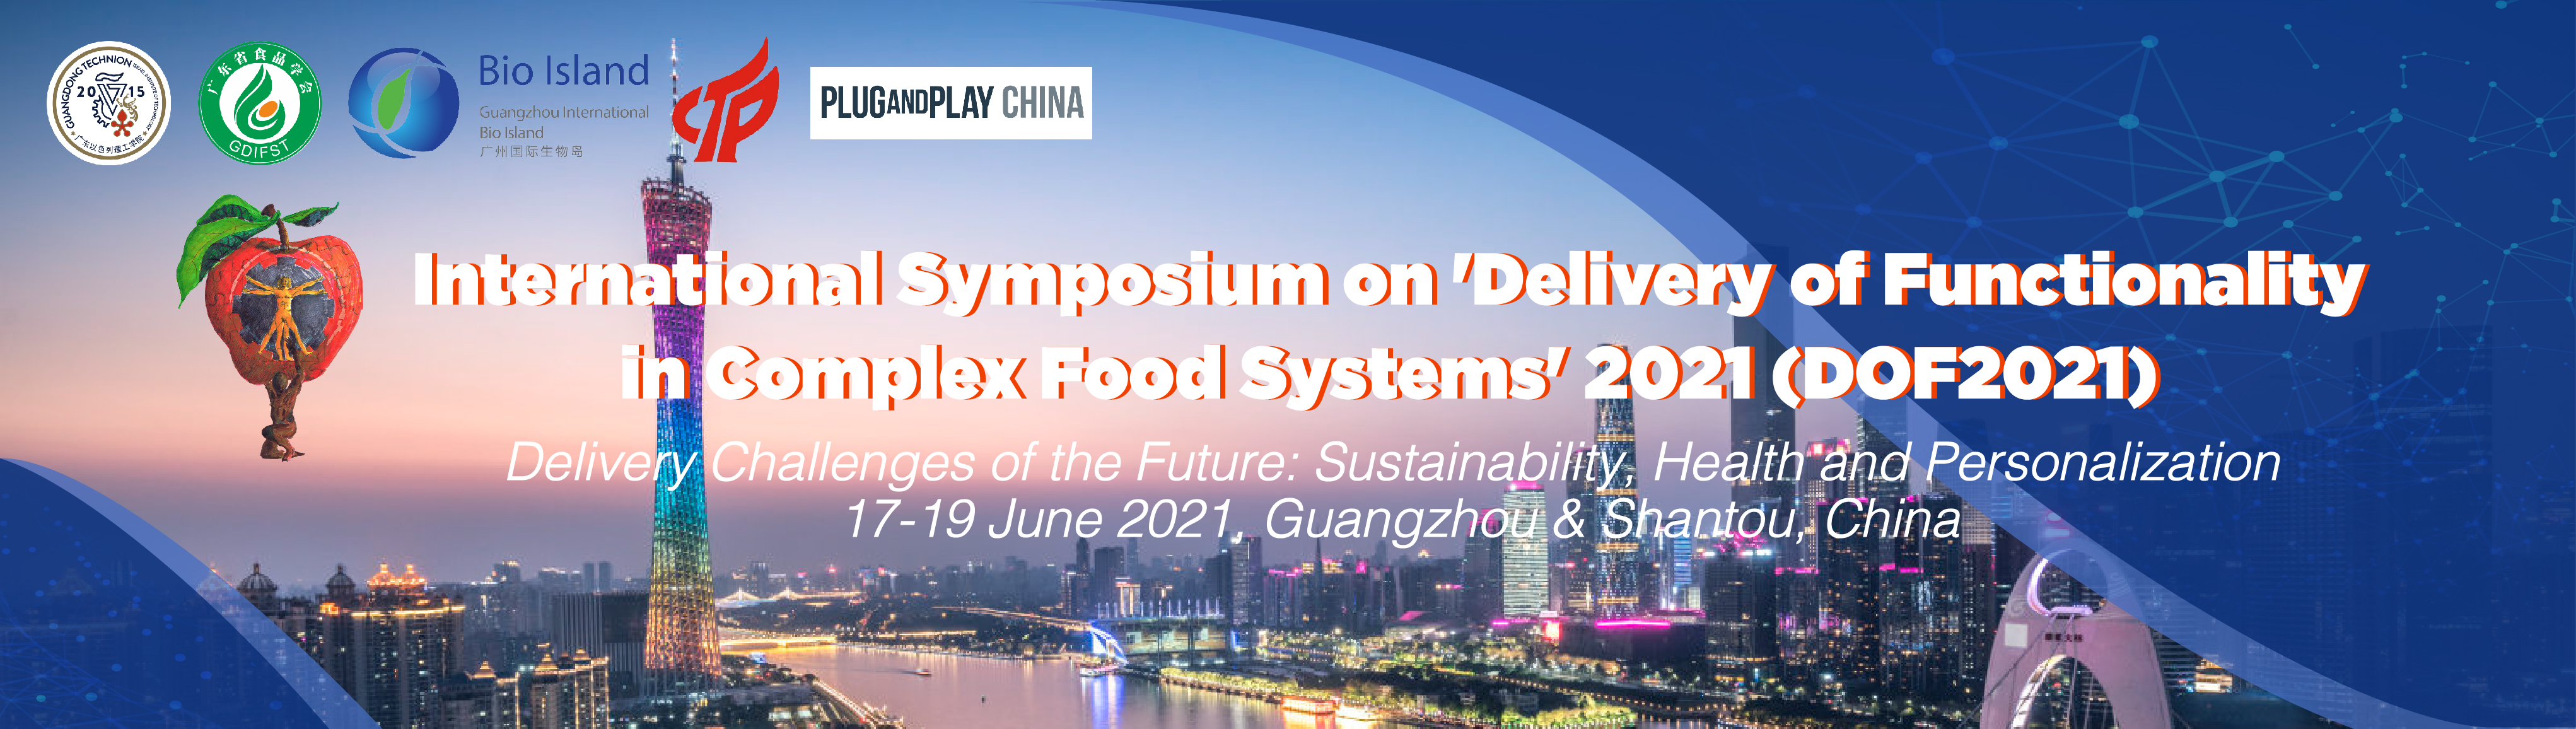 The 9th International Symposium on Delivery of Functionality